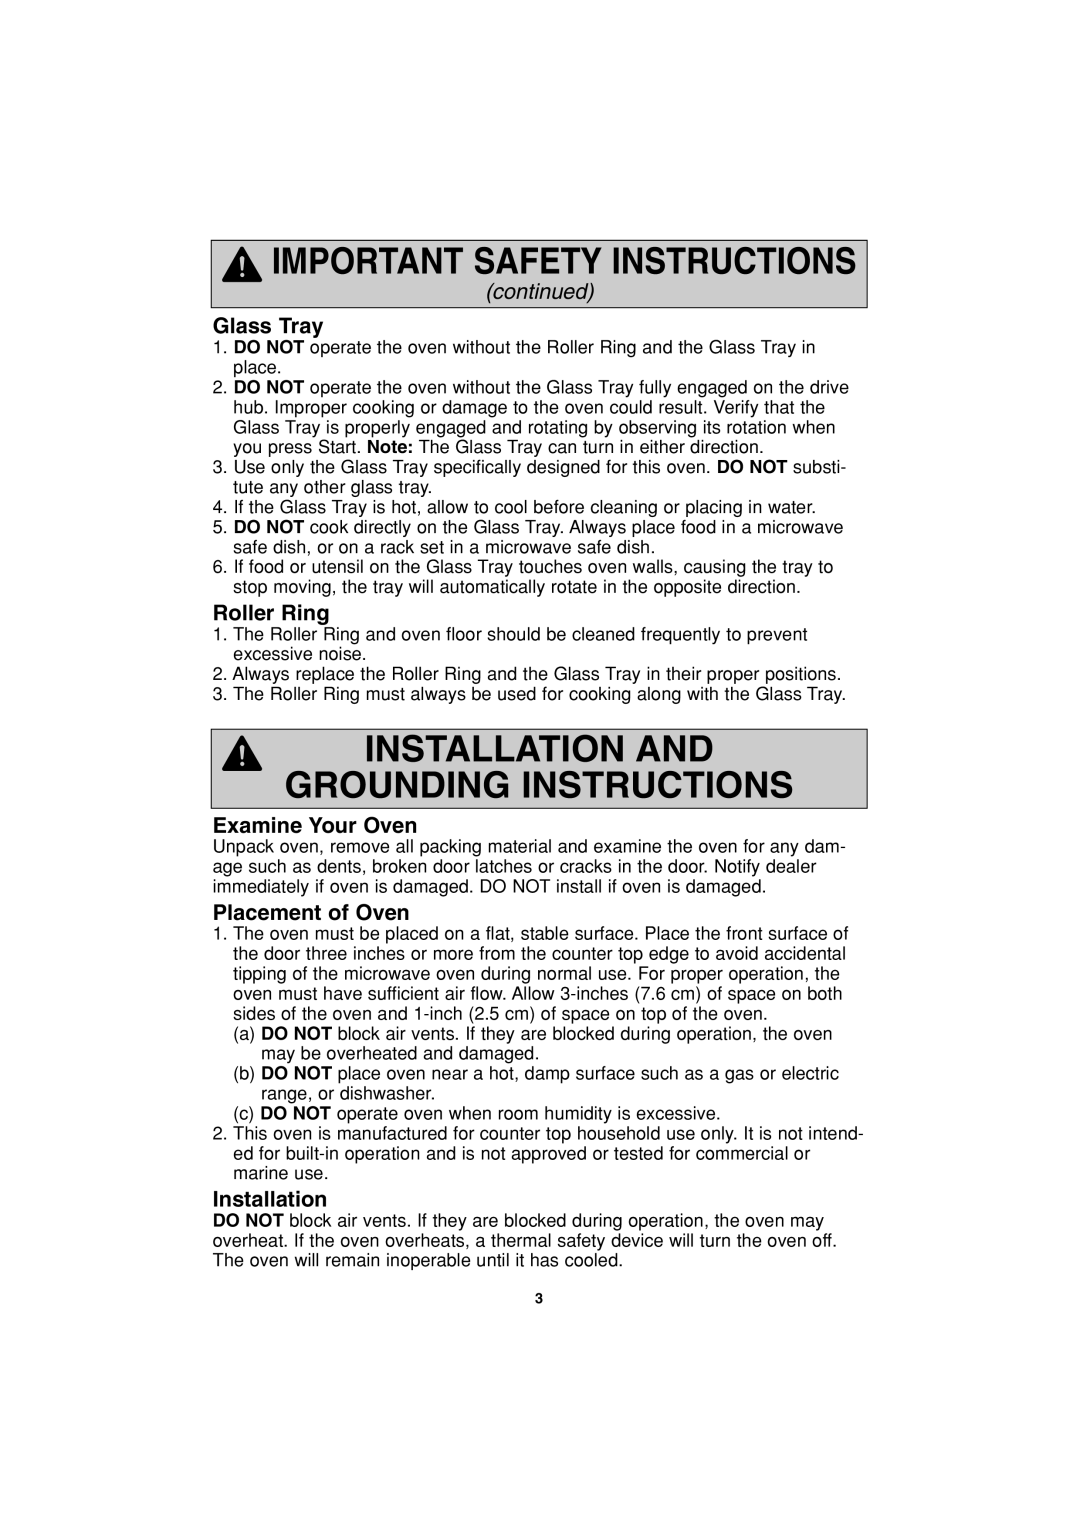 Panasonic NN-S533 Installation And Grounding Instructions, Glass Tray, Roller Ring, Examine Your Oven, Placement of Oven 